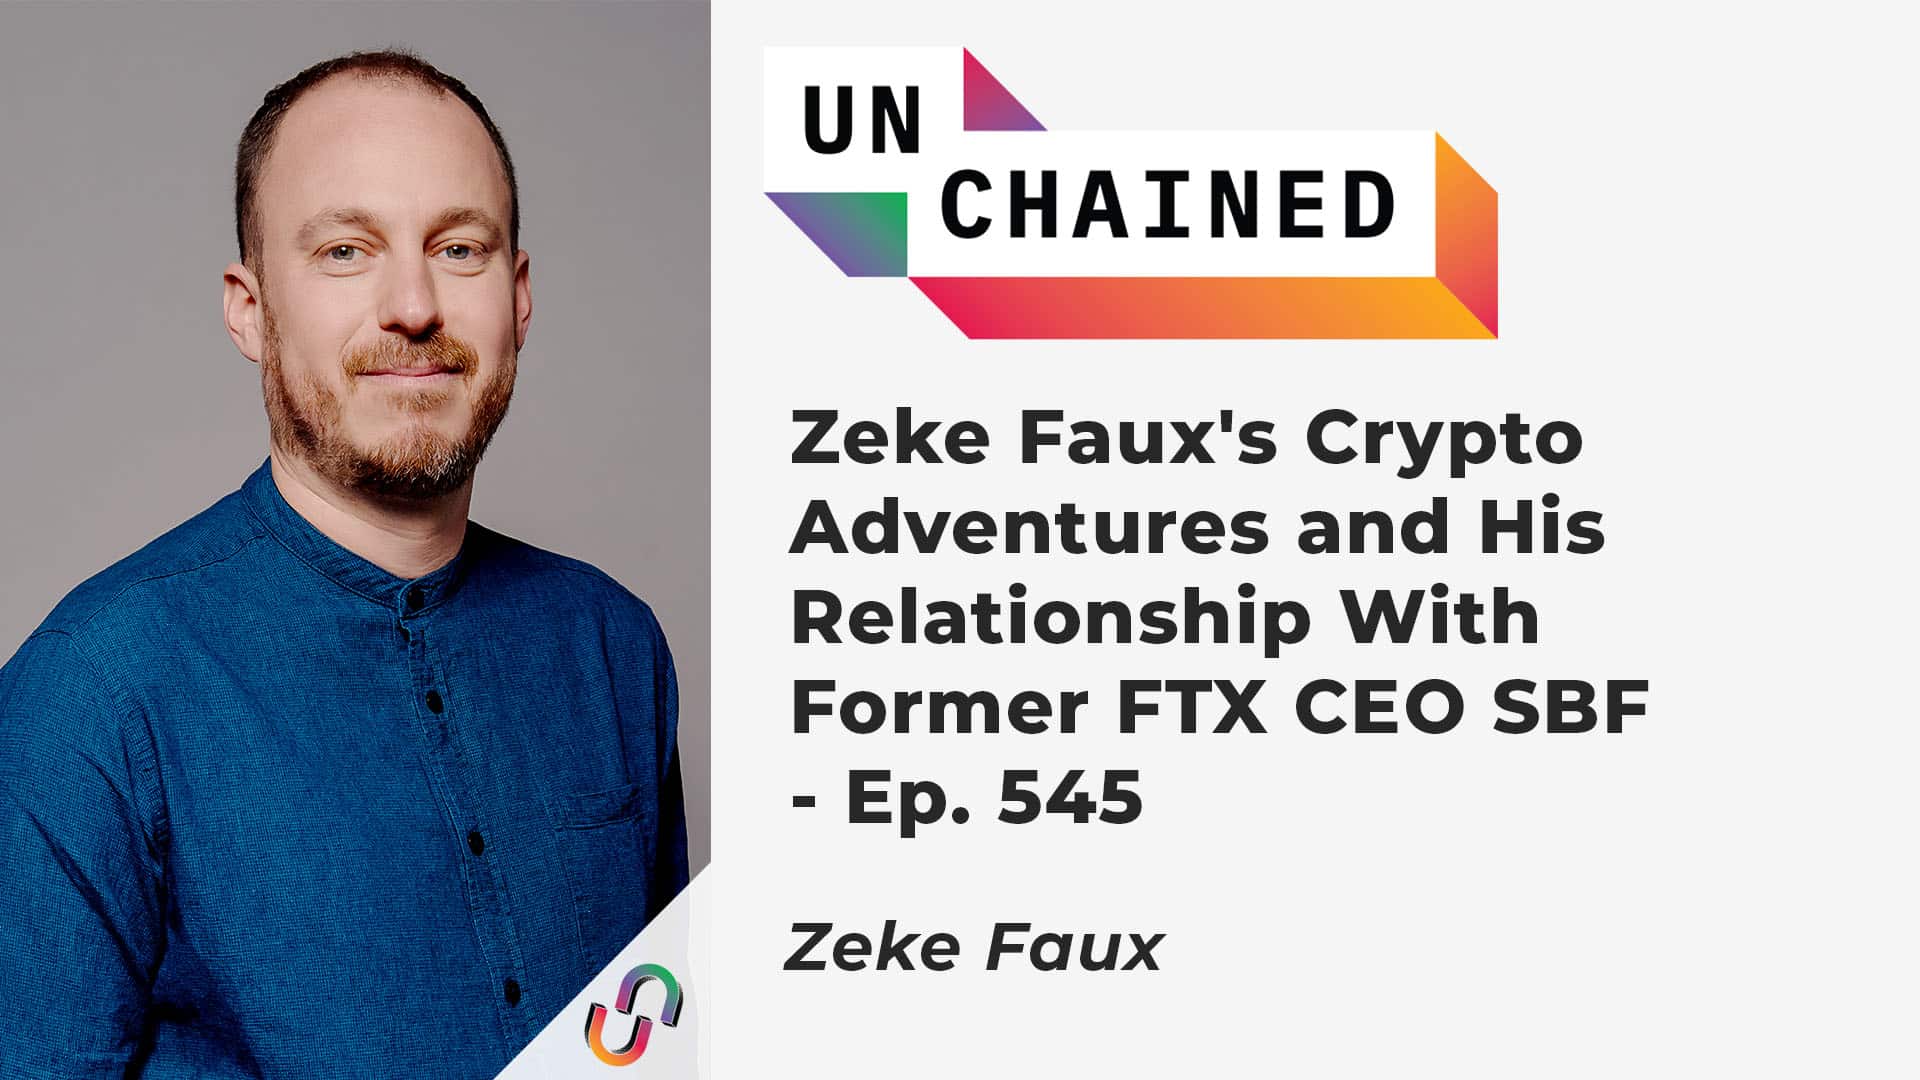 Zeke Faux's Crypto Adventures and His Relationship With Former FTX CEO SBF - Ep. 545